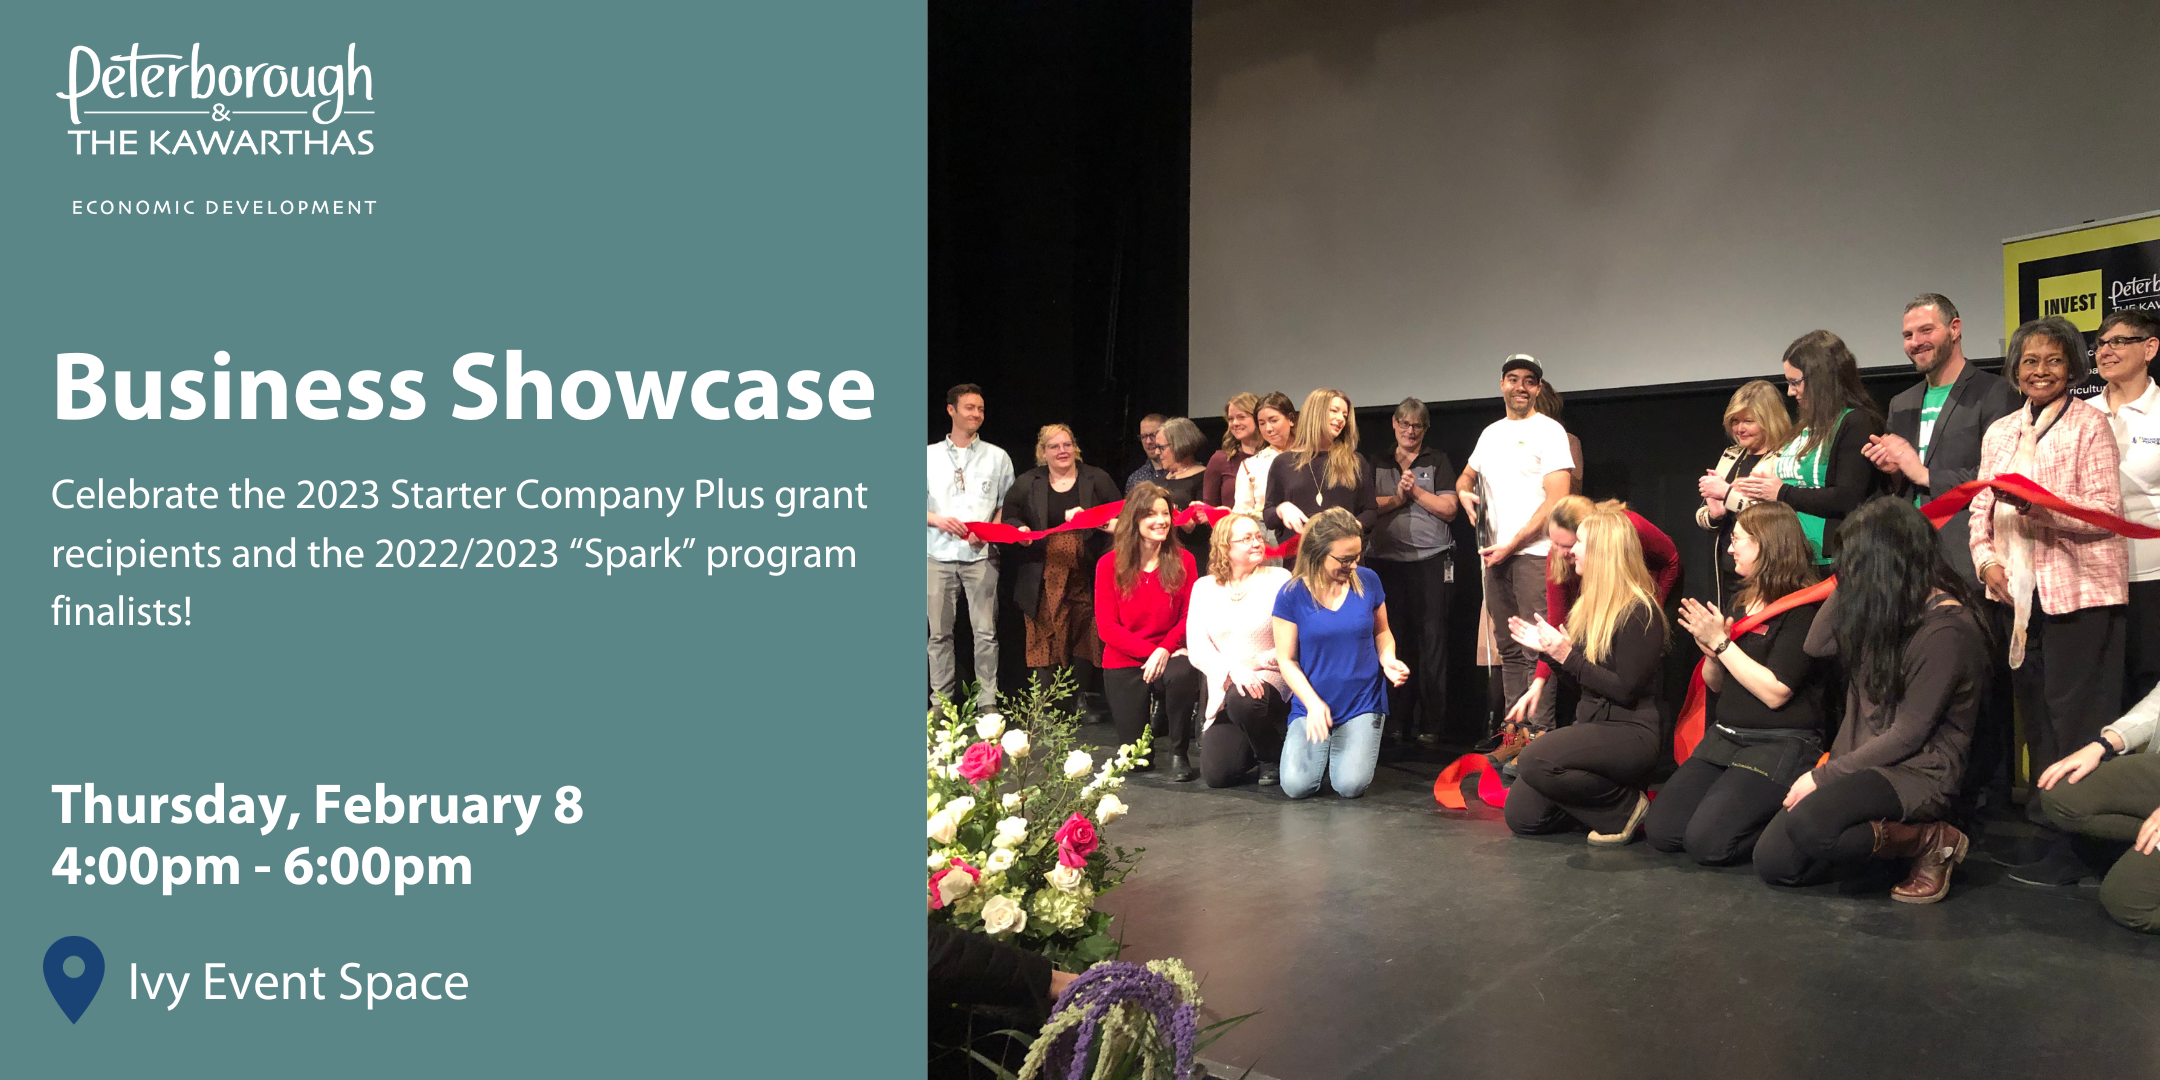 Business Showcase Event graphic. On the right hand side, a group of entrepreneurs gathered and cutting a red ribbon. On the left hand side, text that reads: Business Showcase. Celebrate the 2023 Starter Company Plus grant recipients and the 2022/2023 "Spark" program finalists. Thursday, February 8, 4:00pm-6:00pm. Ive Event Space